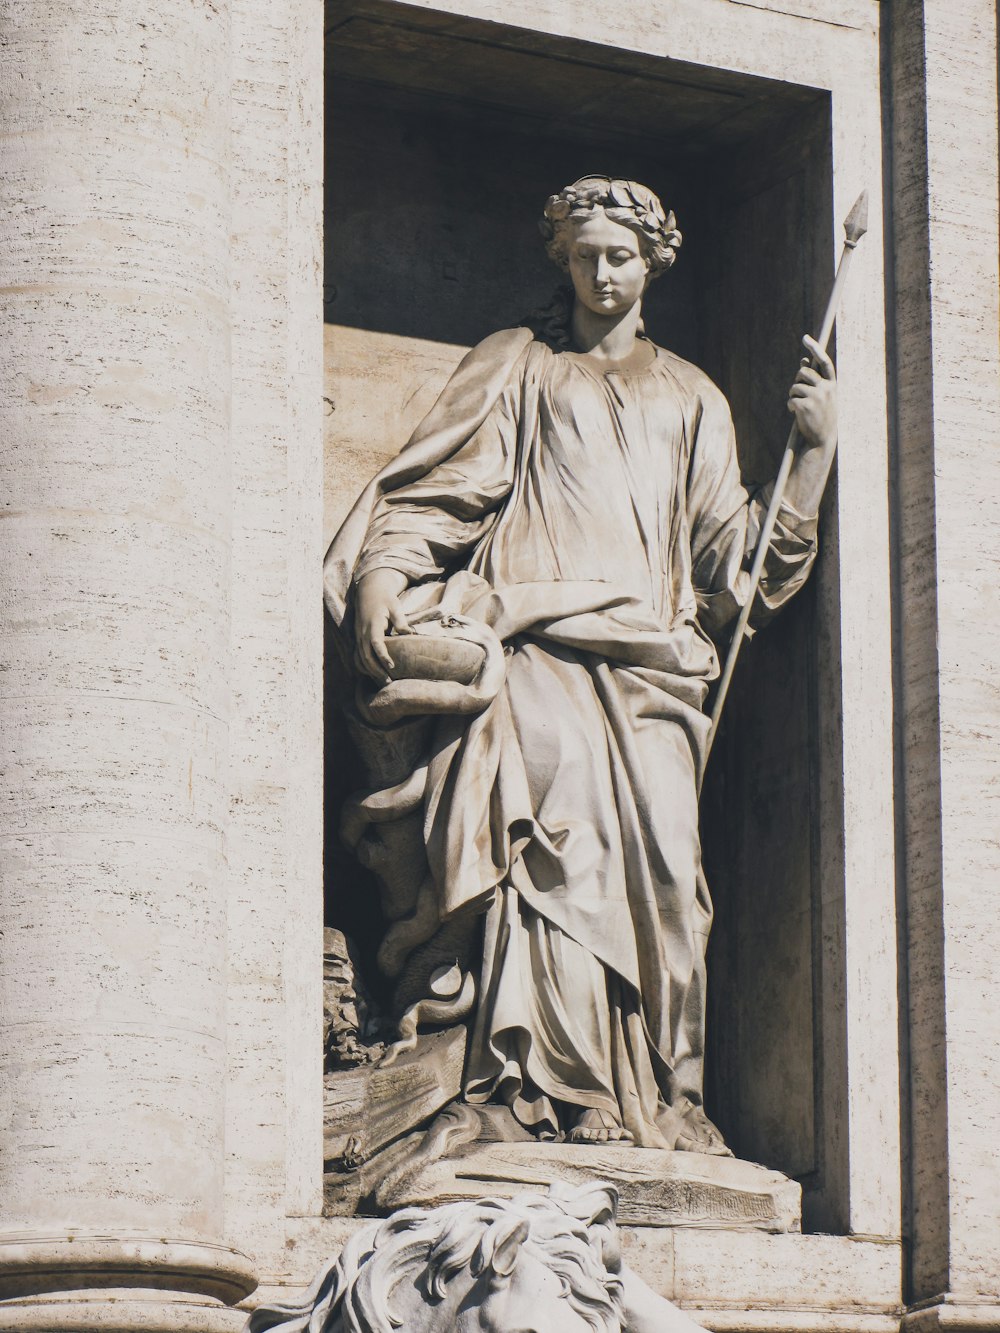 a statue of a man holding a sword in front of a building